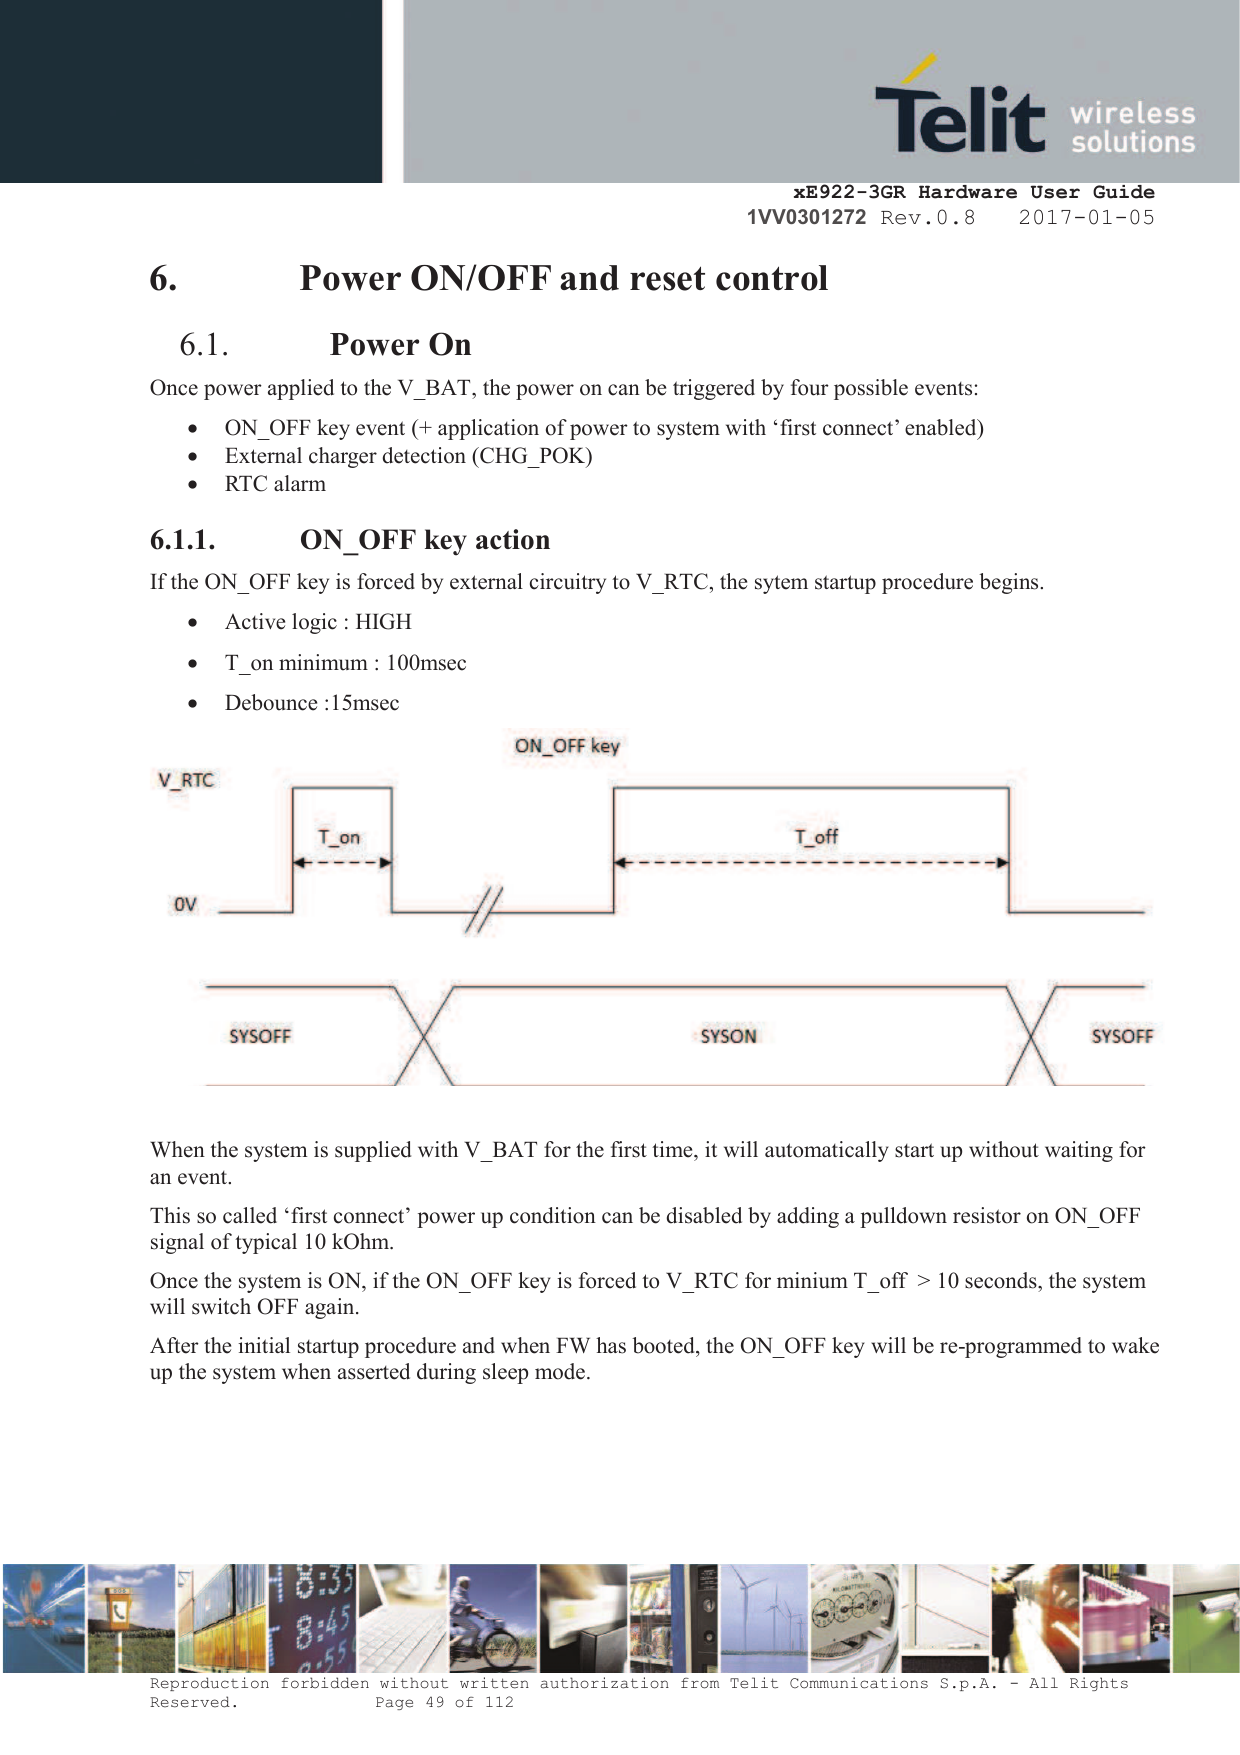     xE922-3GR Hardware User Guide 1VV0301272 Rev.0.8   2017-01-05 Reproduction forbidden without written authorization from Telit Communications S.p.A. - All Rights Reserved.    Page 49 of 112  6. Power ON/OFF and reset control  6.1. Power On  Once power applied to the V_BAT, the power on can be triggered by four possible events: · ON_OFF key event (+ application of power to system with ‘first connect’ enabled) · External charger detection (CHG_POK) · RTC alarm 6.1.1. ON_OFF key action If the ON_OFF key is forced by external circuitry to V_RTC, the sytem startup procedure begins.  · Active logic : HIGH · T_on minimum : 100msec  · Debounce :15msec   When the system is supplied with V_BAT for the first time, it will automatically start up without waiting for an event.   This so called ‘first connect’ power up condition can be disabled by adding a pulldown resistor on ON_OFF signal of typical 10 kOhm.  Once the system is ON, if the ON_OFF key is forced to V_RTC for minium T_off  &gt; 10 seconds, the system will switch OFF again.  After the initial startup procedure and when FW has booted, the ON_OFF key will be re-programmed to wake up the system when asserted during sleep mode.  